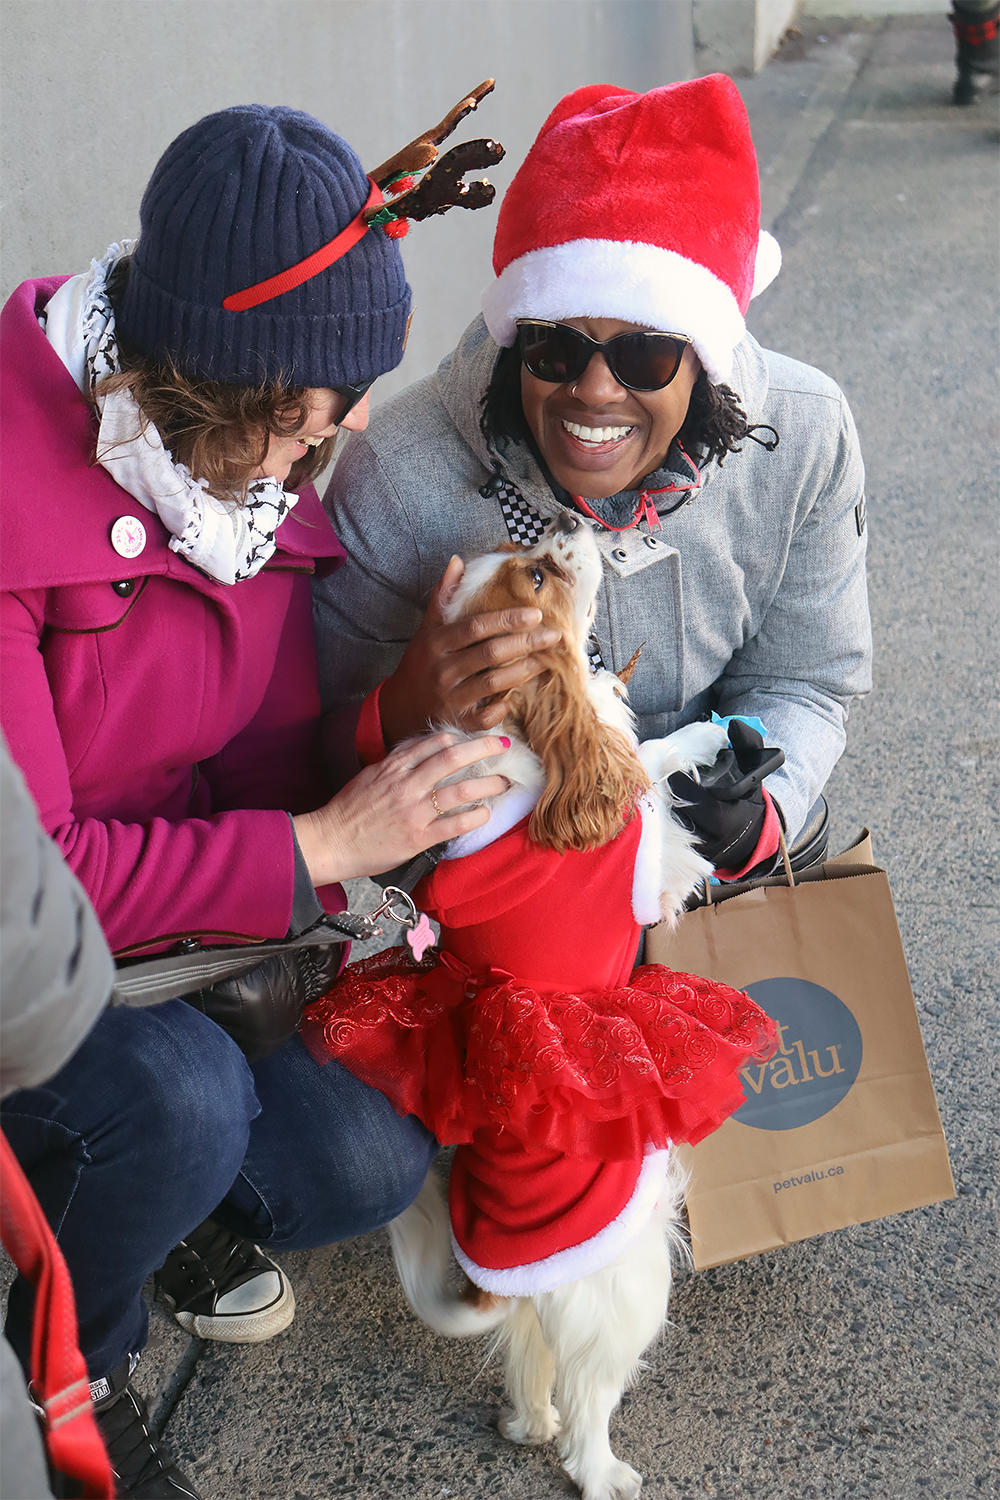 Two women bundled up in their coats and Christmas themed hats pet a dog dressed in a red tutu